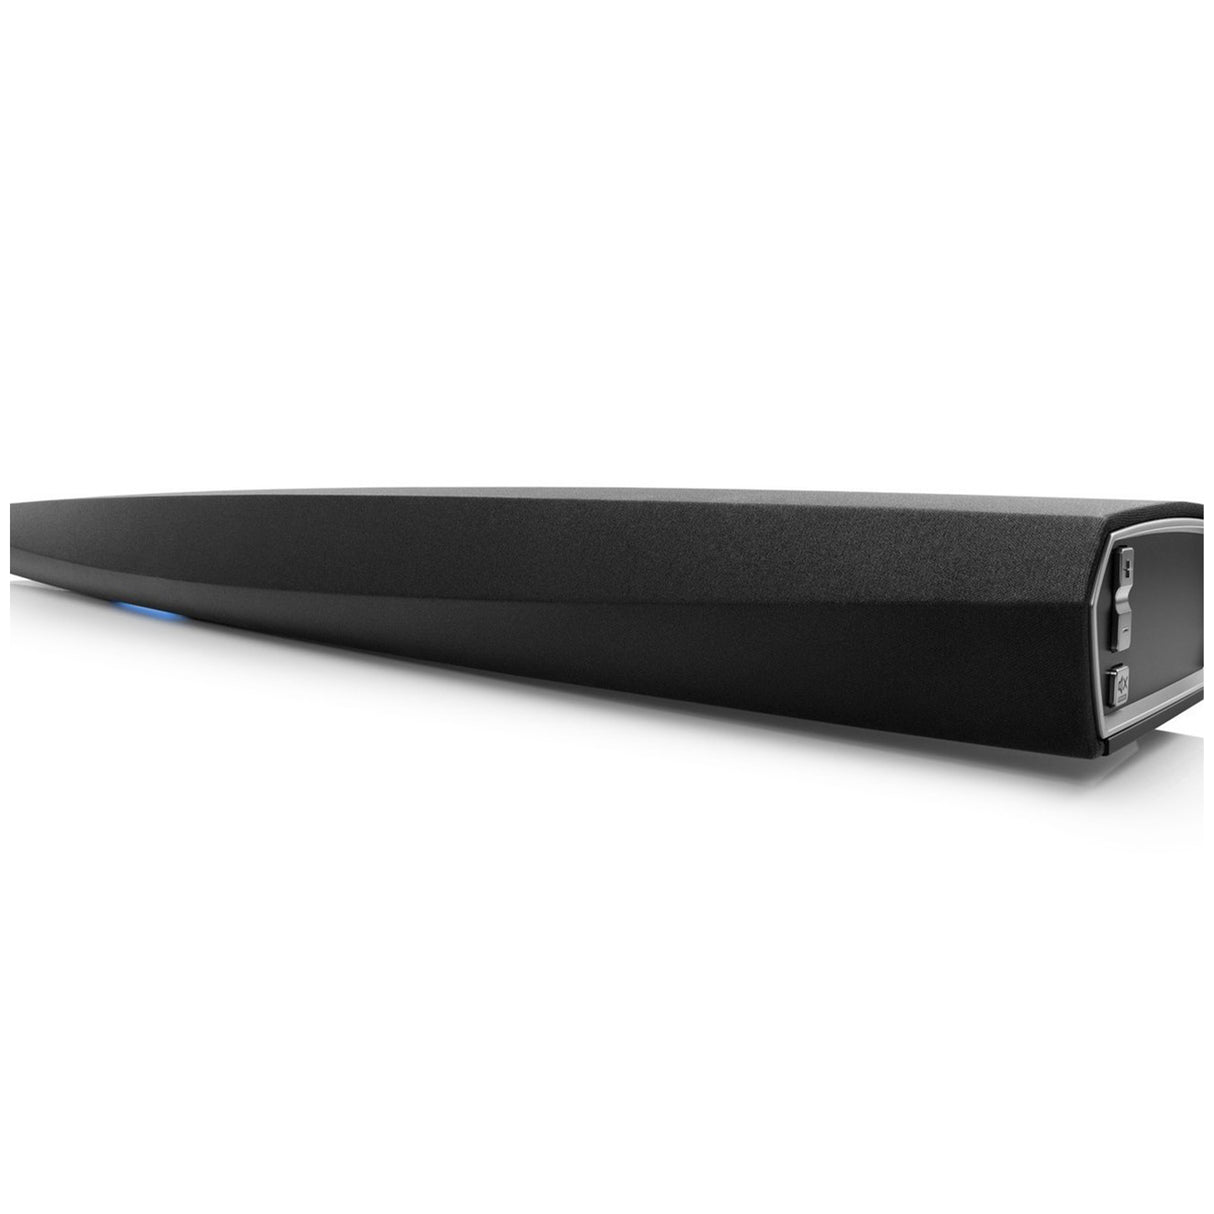 DENON DHT-S716H Sound Bar with Alexa Voice Compatibility and Heos Built-in